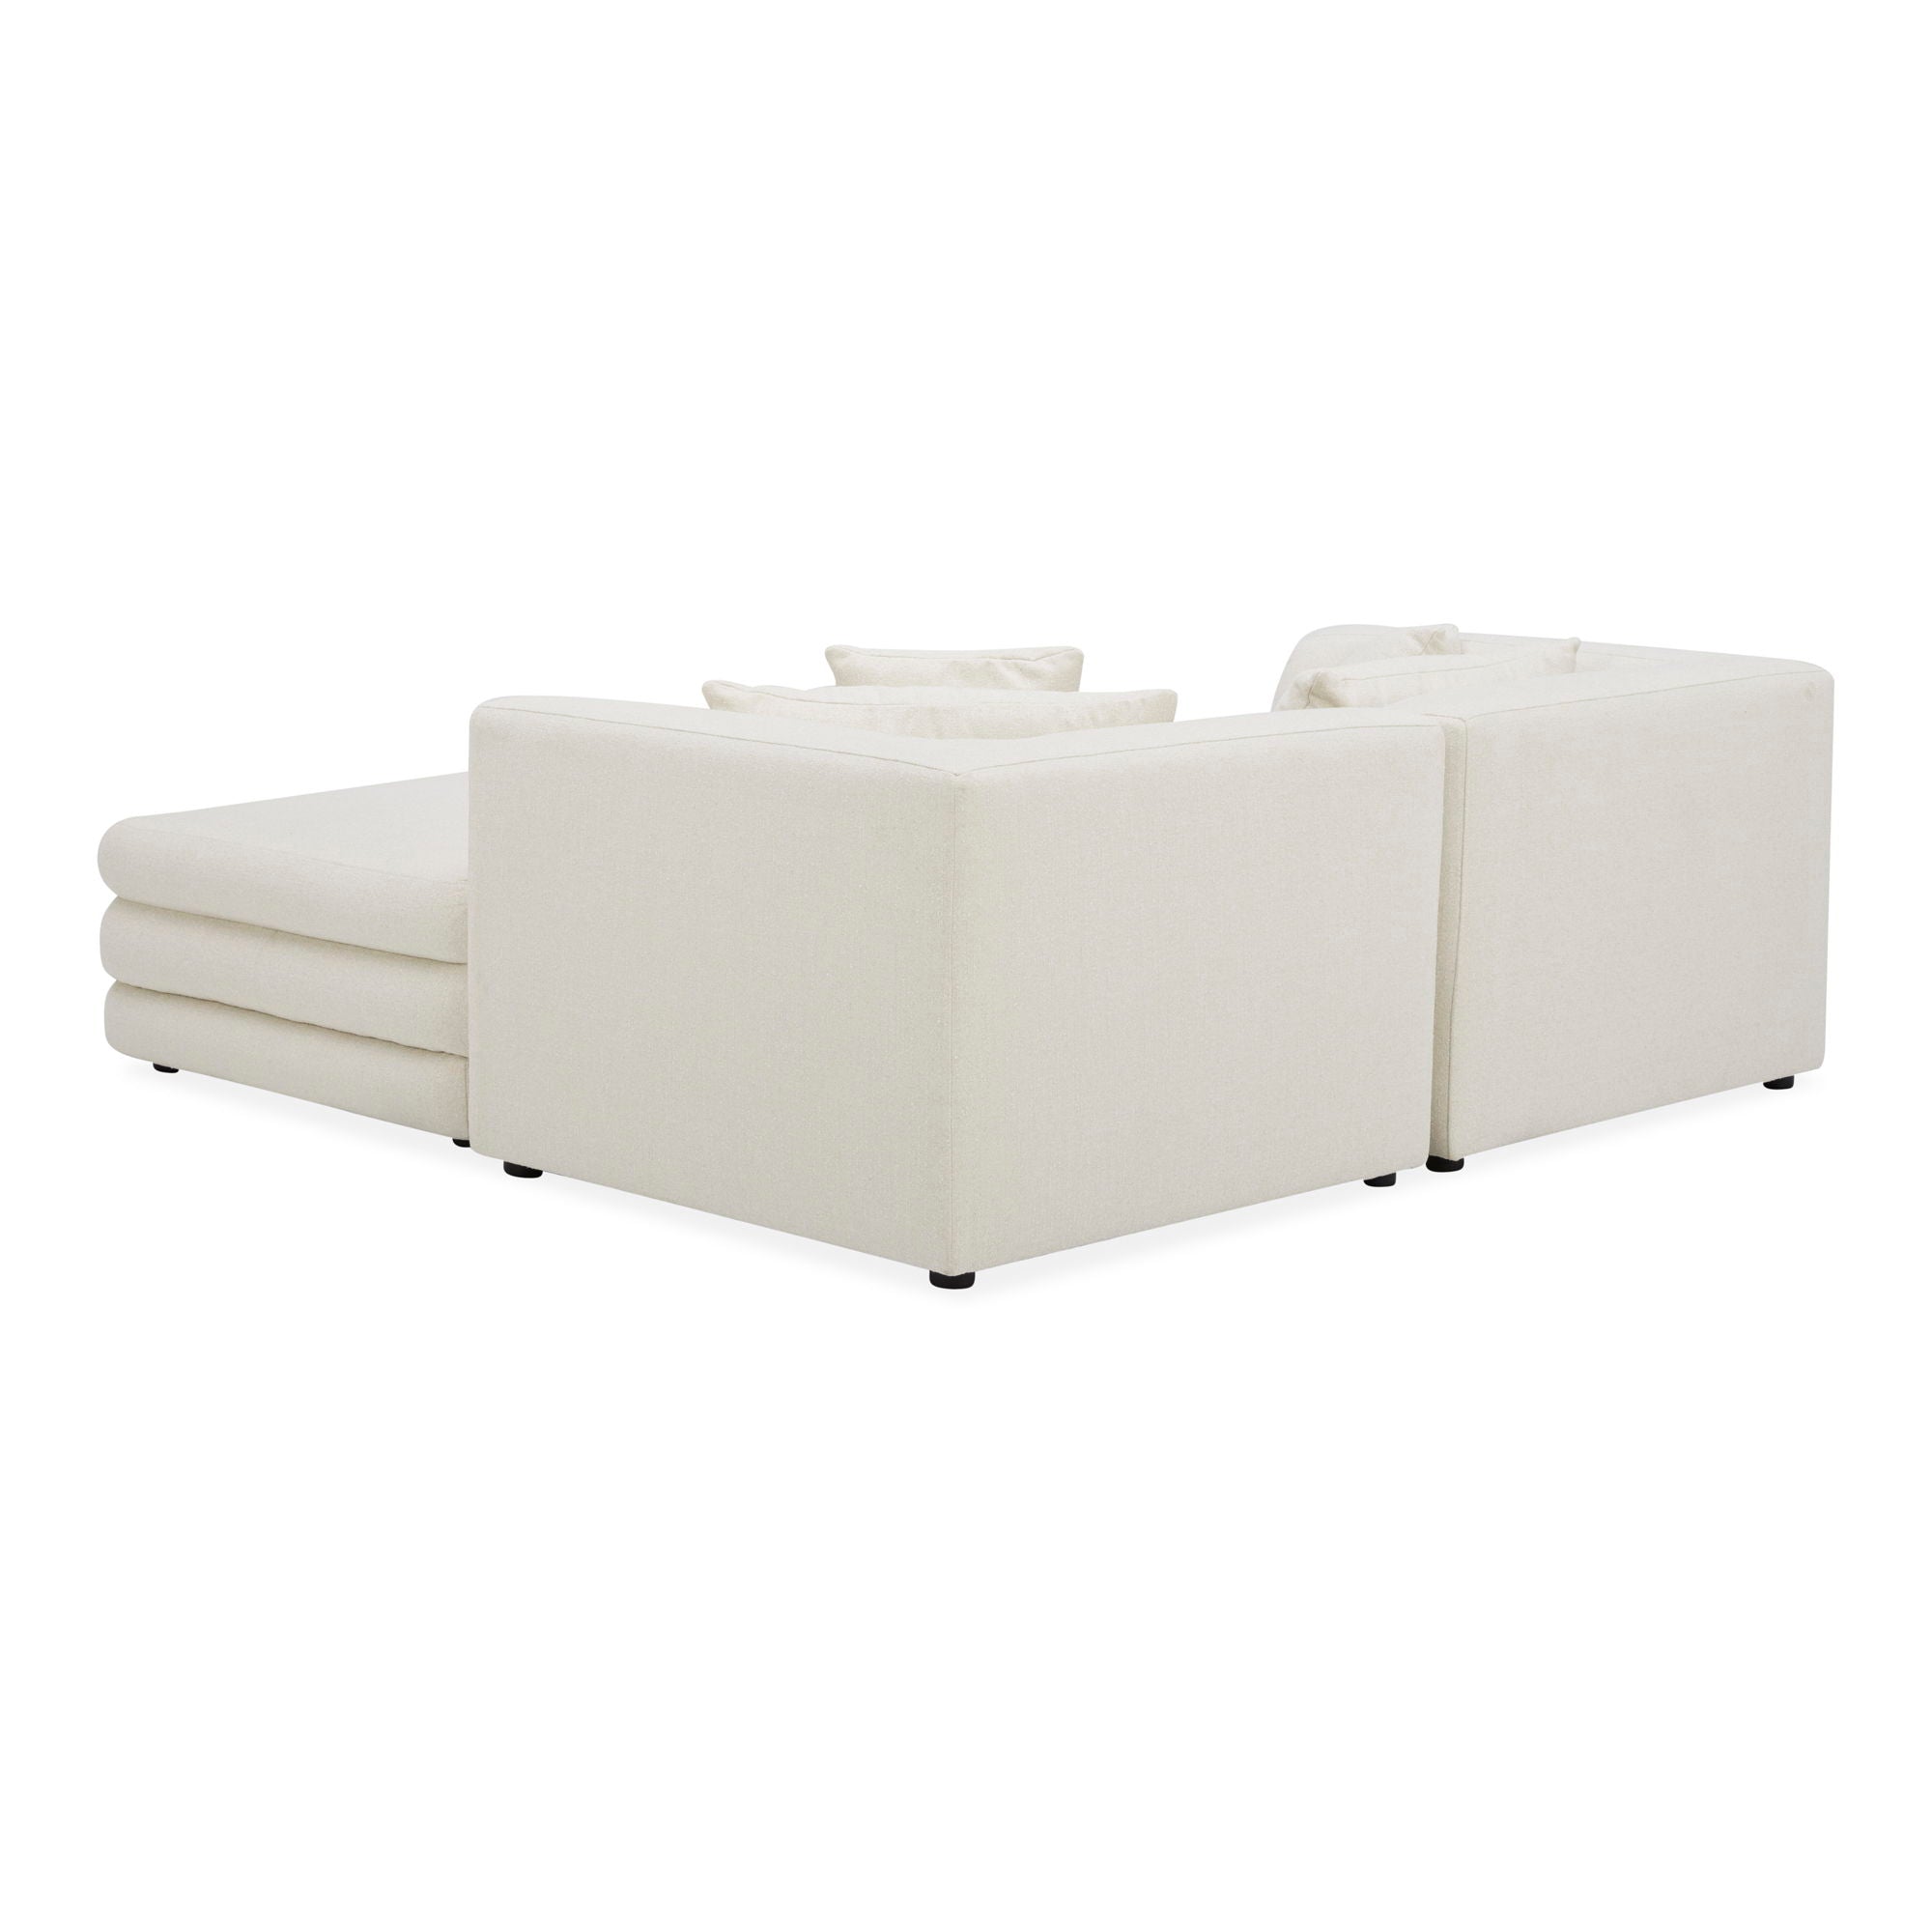 Lowtide - Nook Modular Sectional - Warm White-Stationary Sectionals-American Furniture Outlet